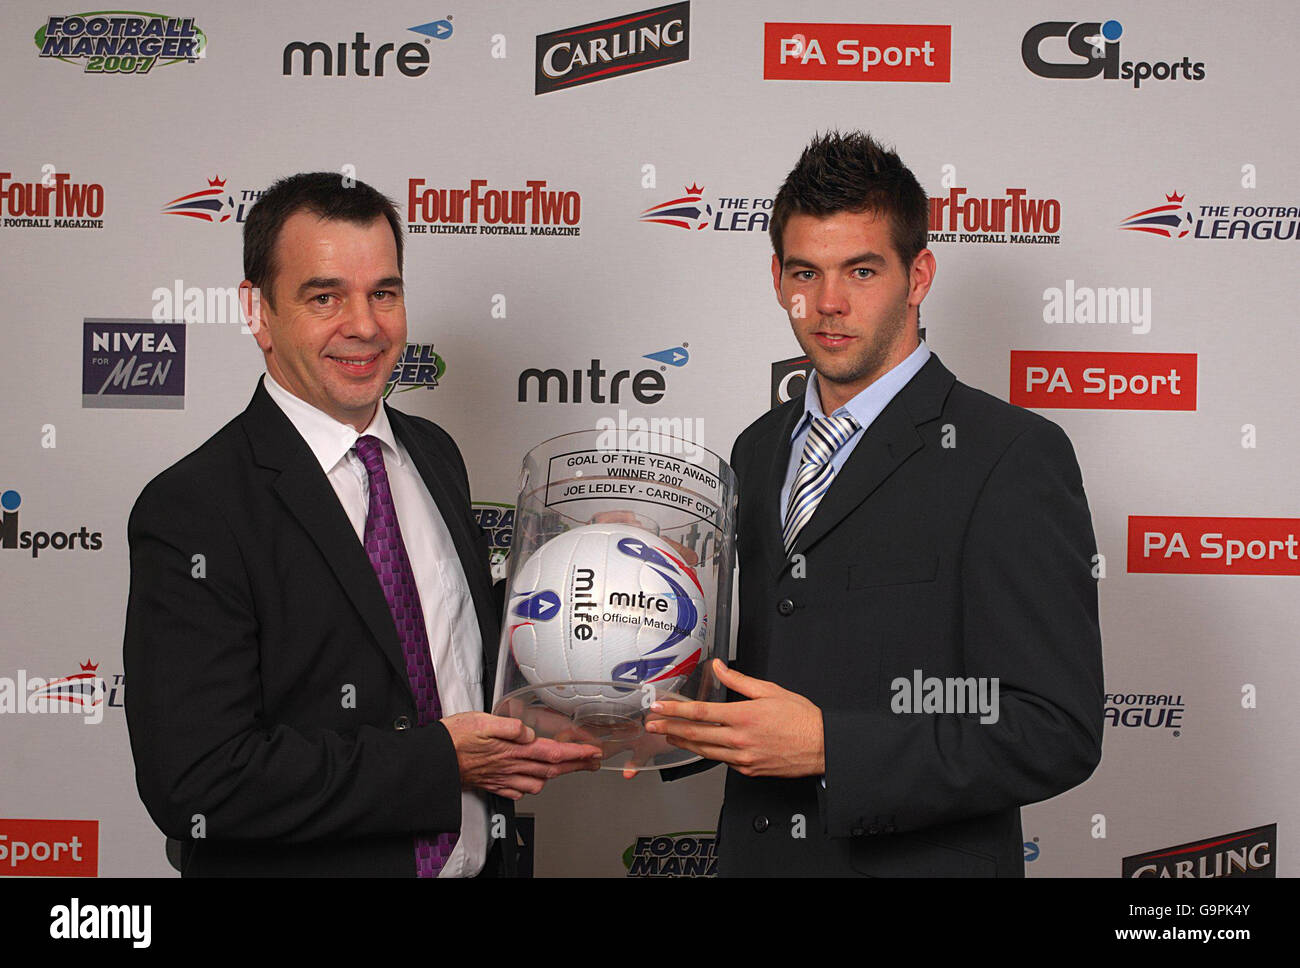 Cardiff City's Joe Ledley receives his Goal of the Year award from Mitre Managing Director Gary Hibbert during the Football League Awards at Grosvenor House, London, Sunday March 4, 2007. Stock Photo